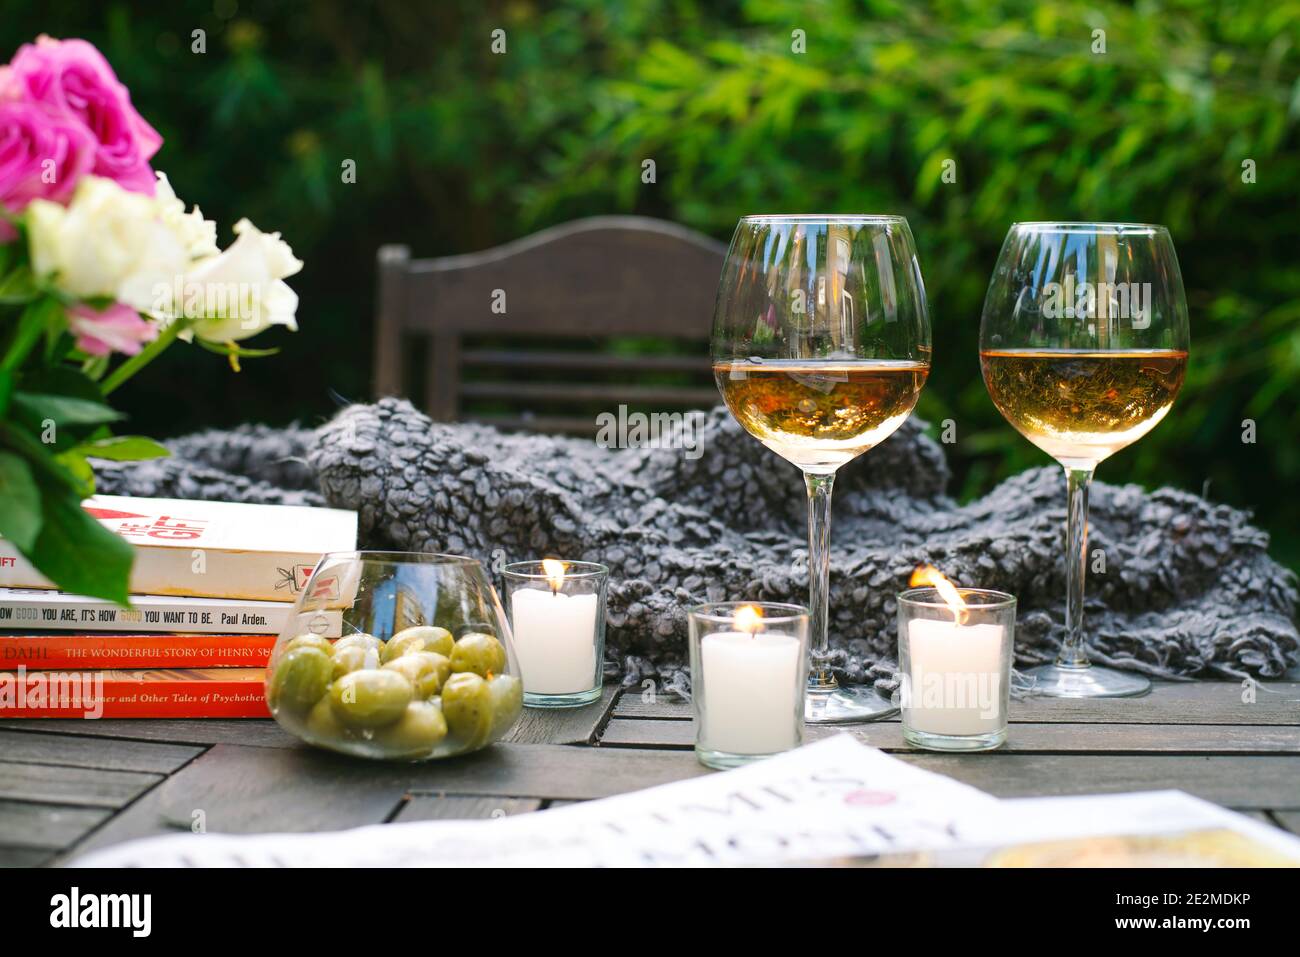 Wine, olives and books on wooden table in outdoor garden setting. Cosy home decor, relaxed tablescape. Summertime, laid-back weekend lifestyle in UK Stock Photo